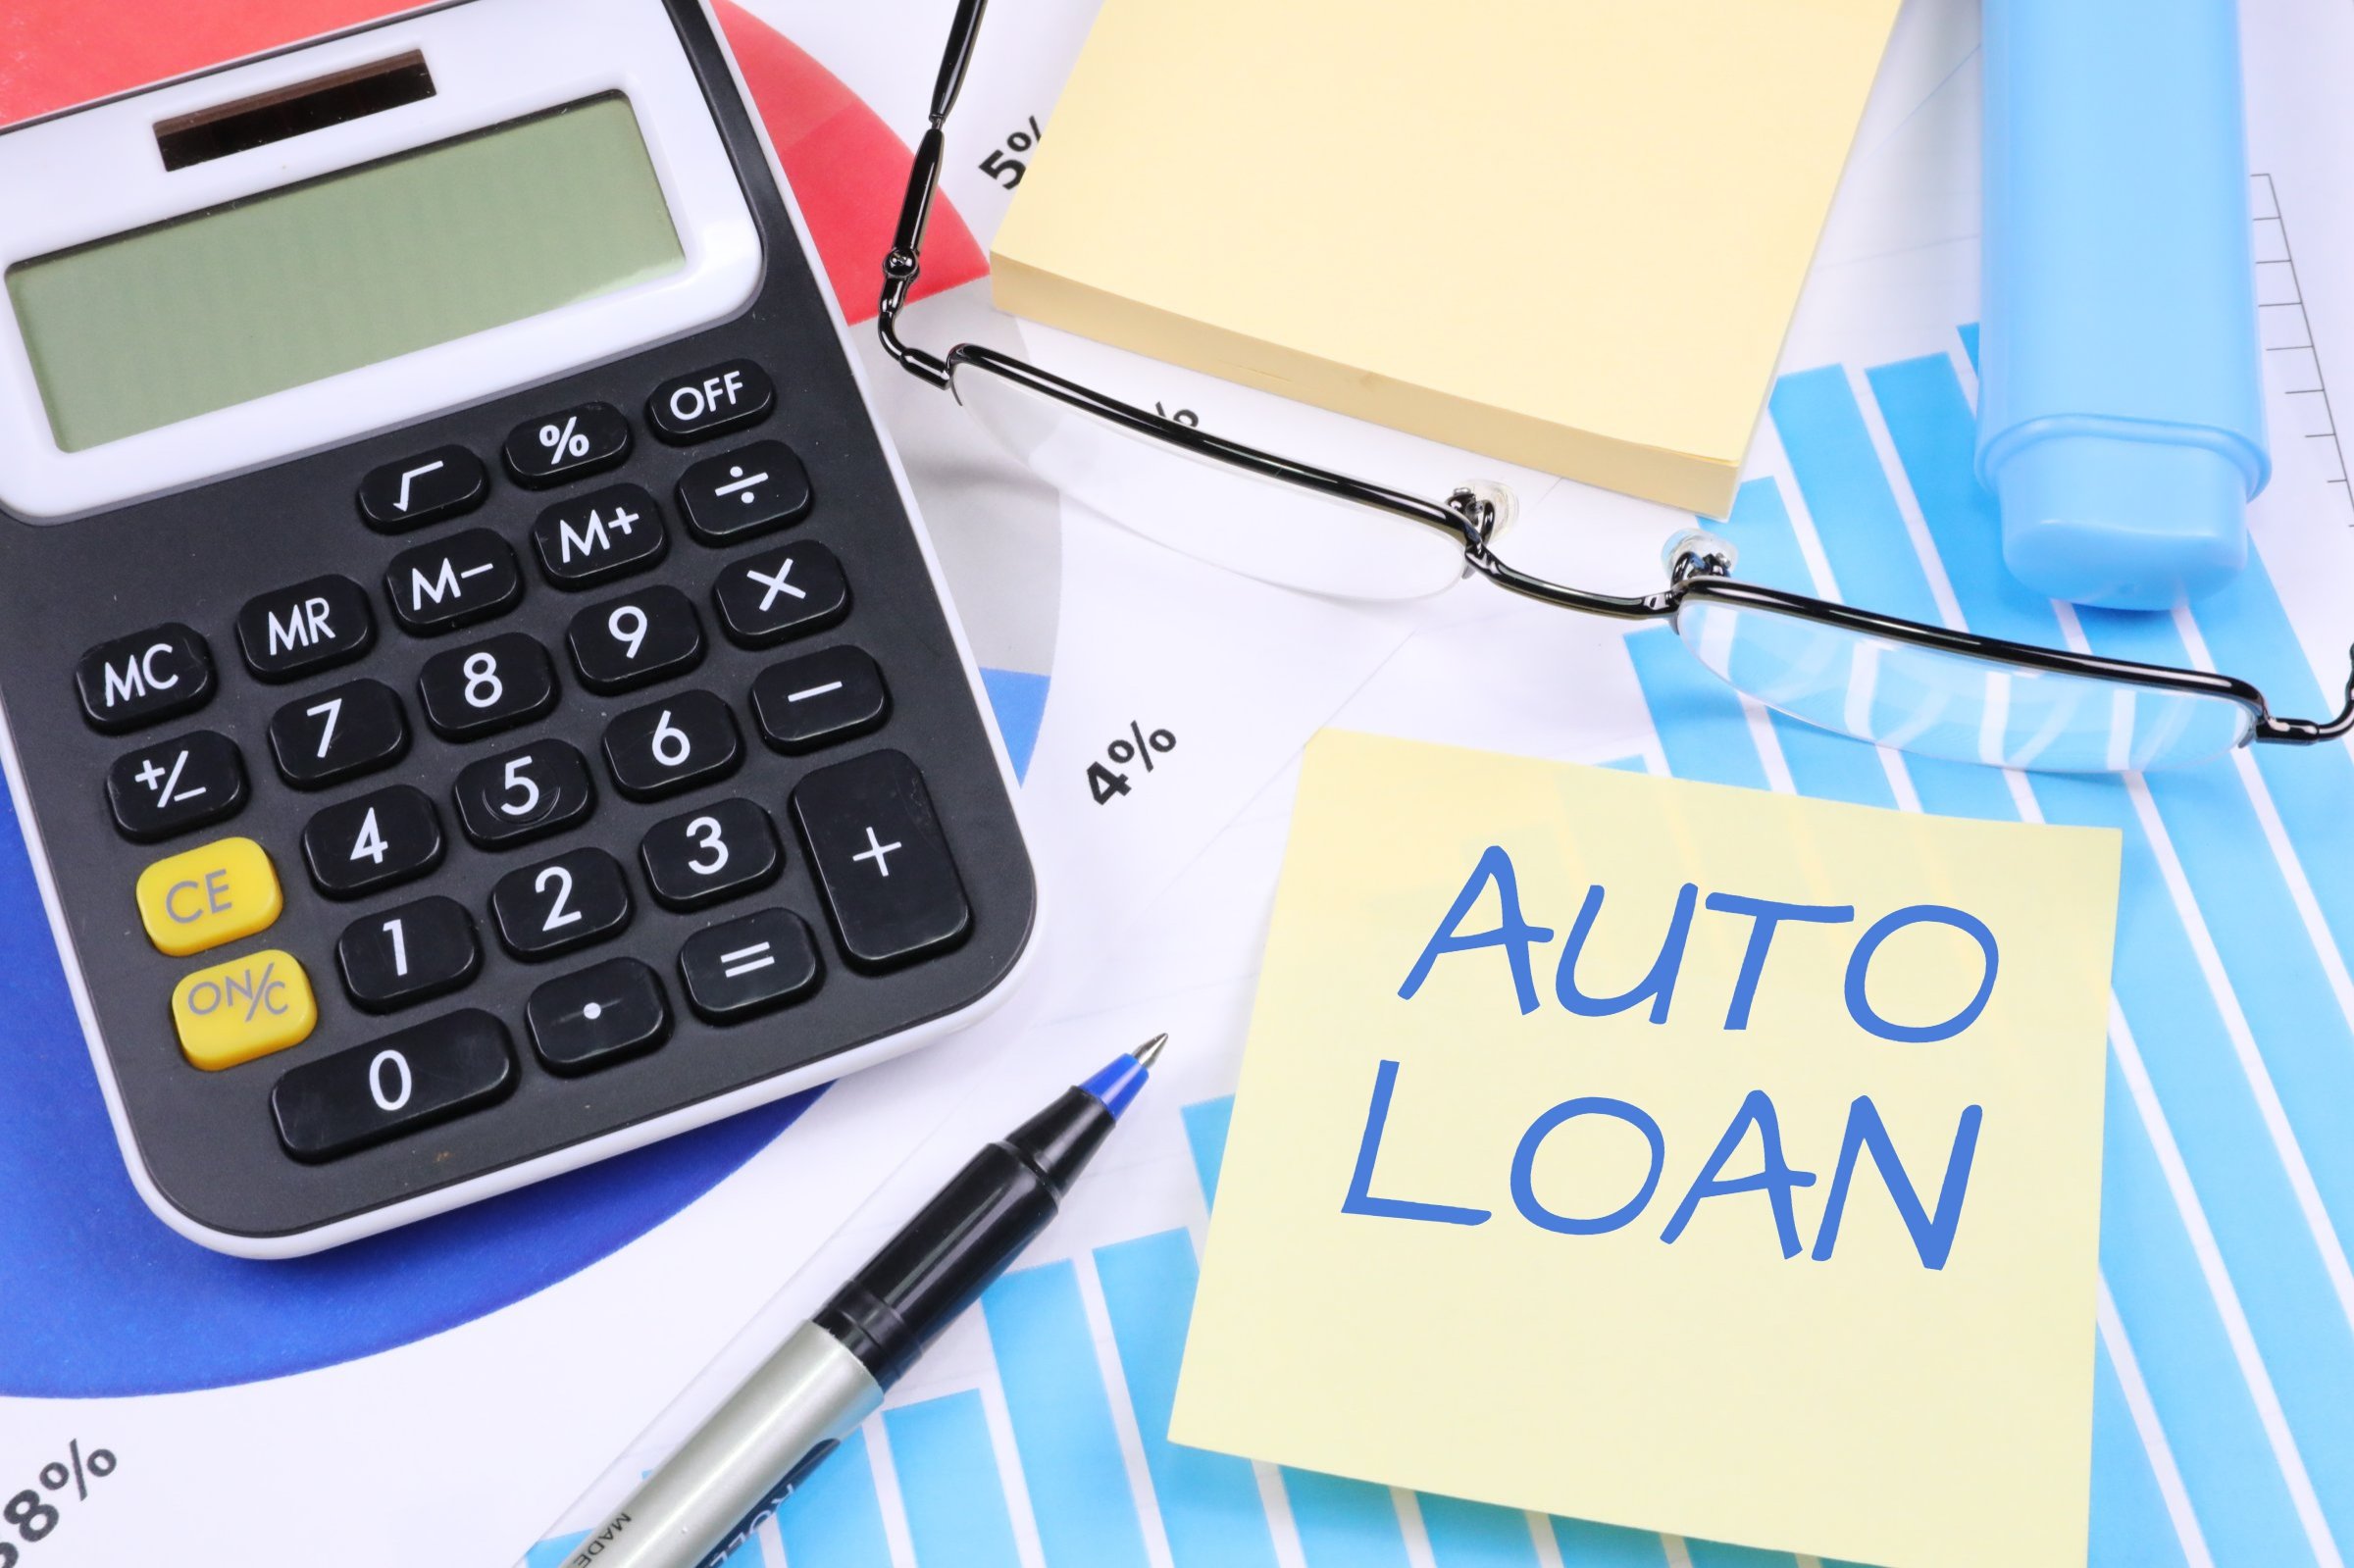 Auto Loan - Free of Charge Creative Commons Financial 9 image